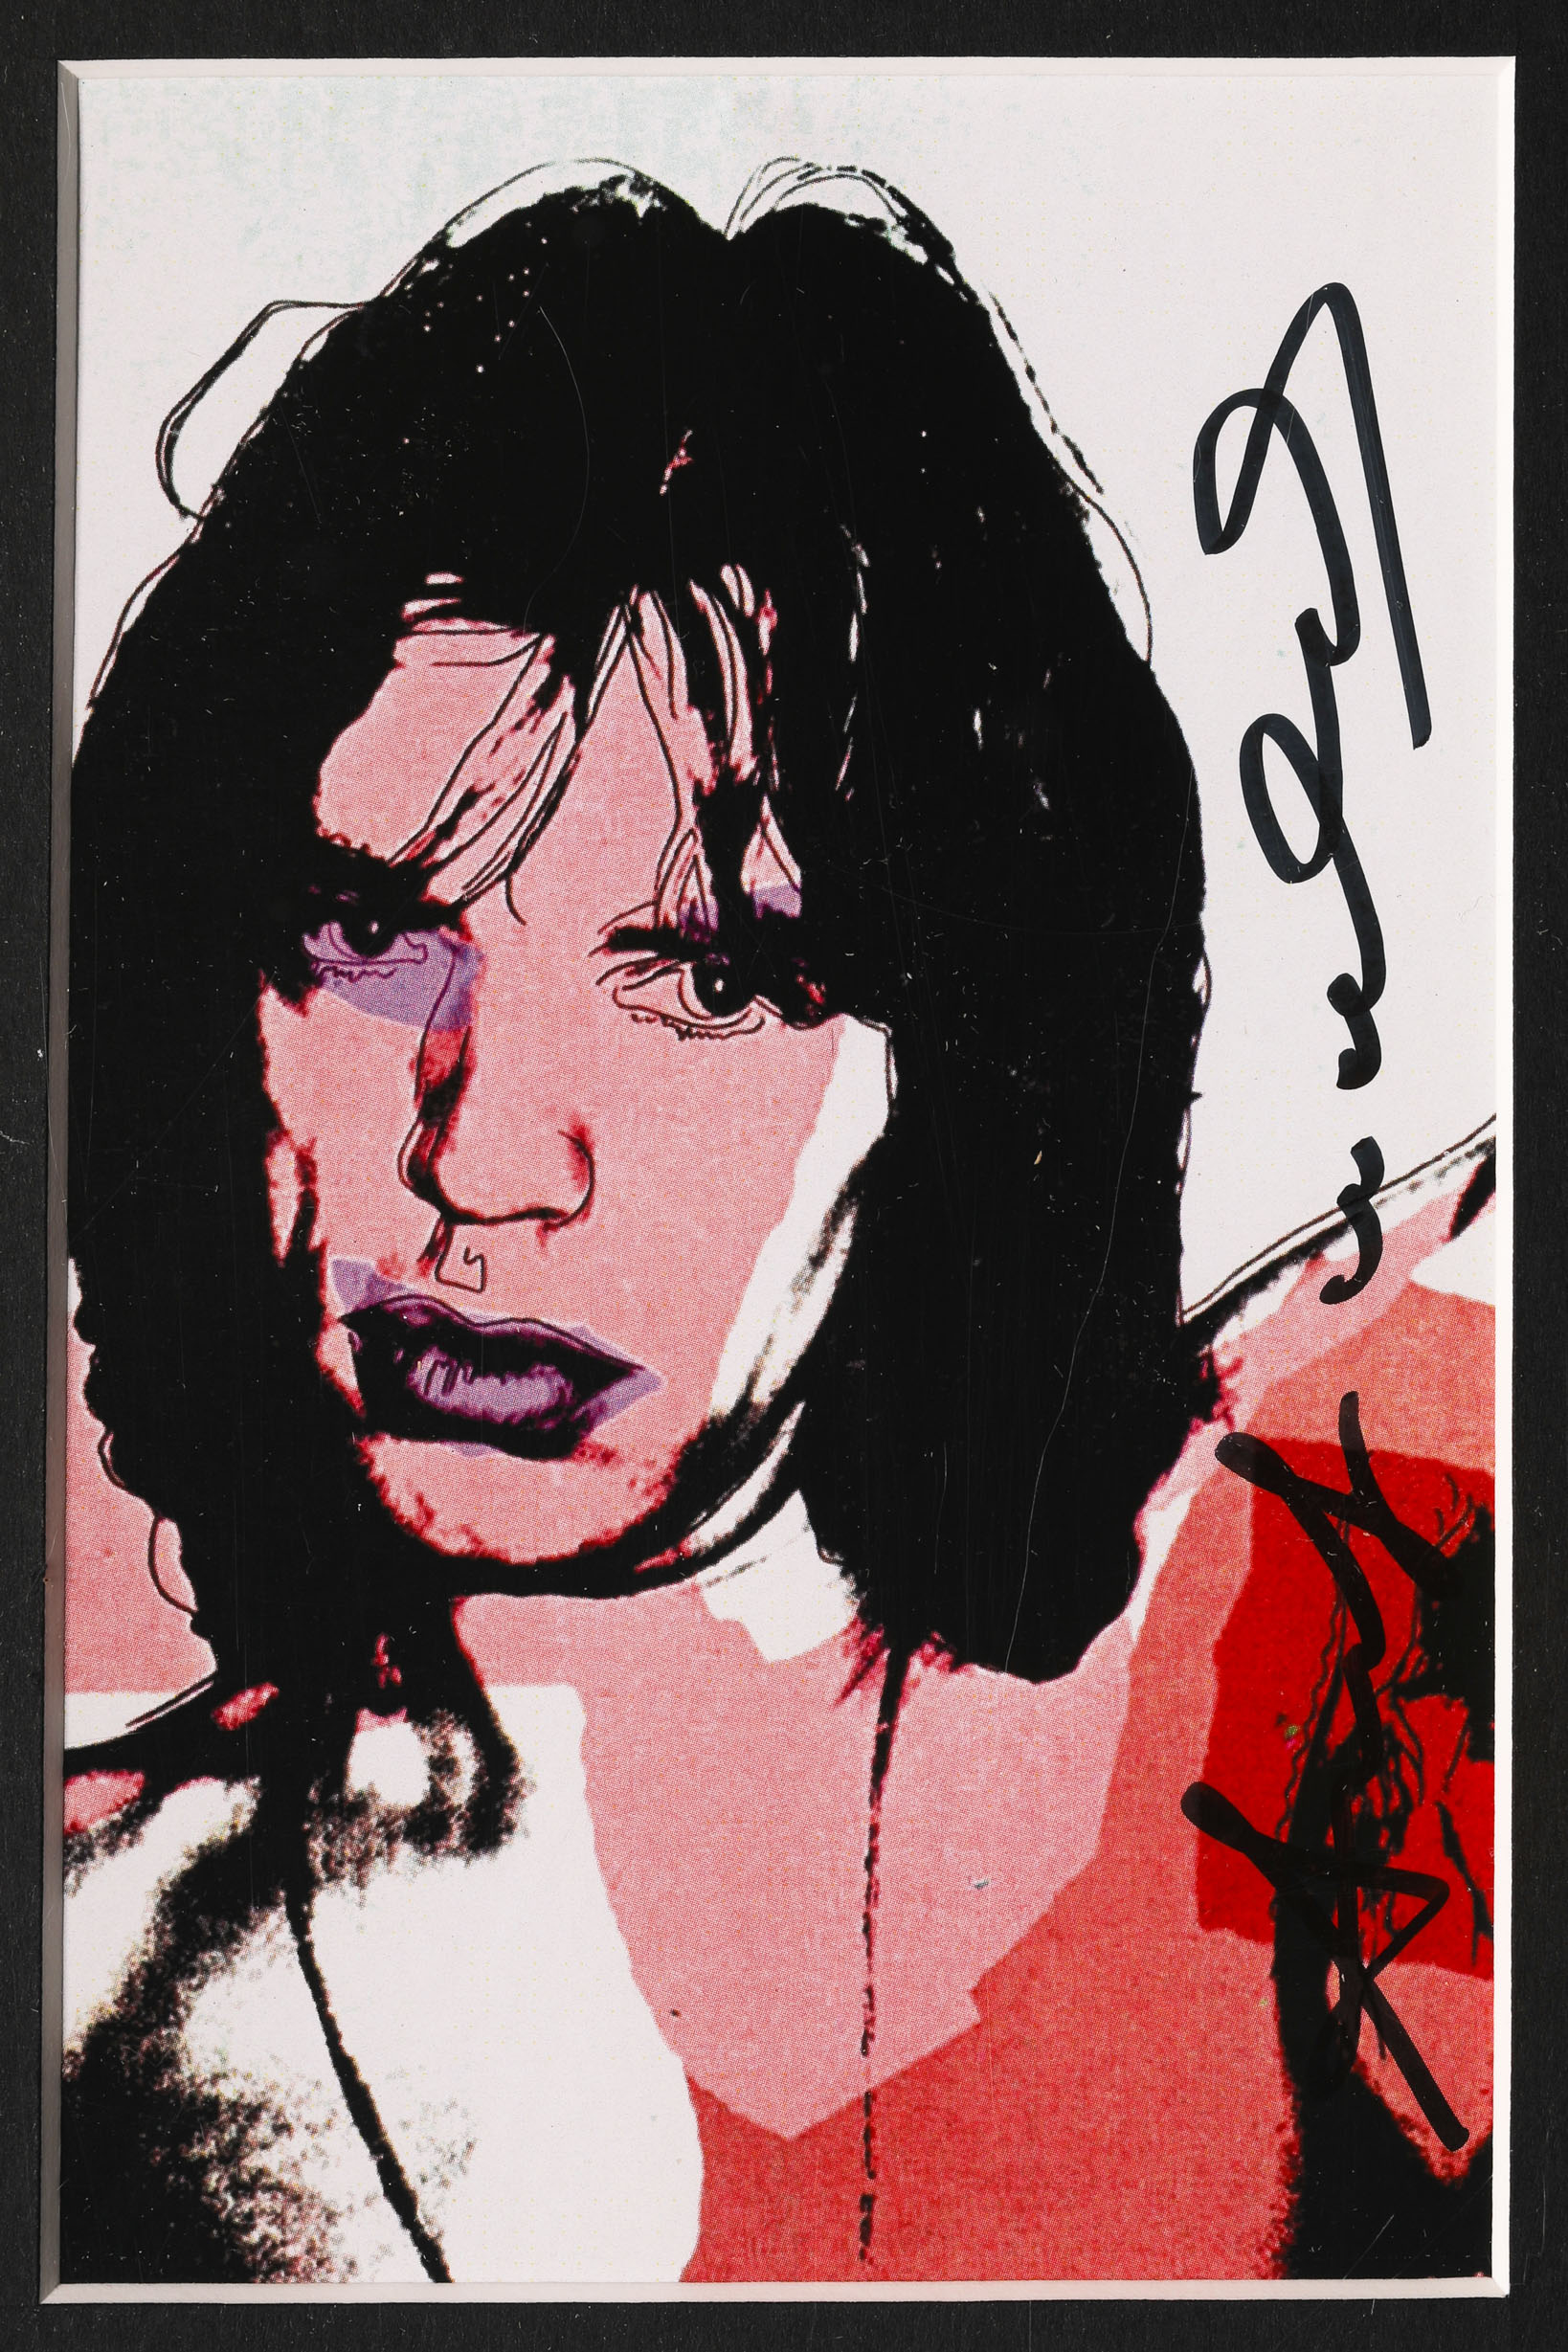 Andy Warhol, Mini Portfolio Mick Jagger with 10 Prints, 1975, signed - Image 7 of 16